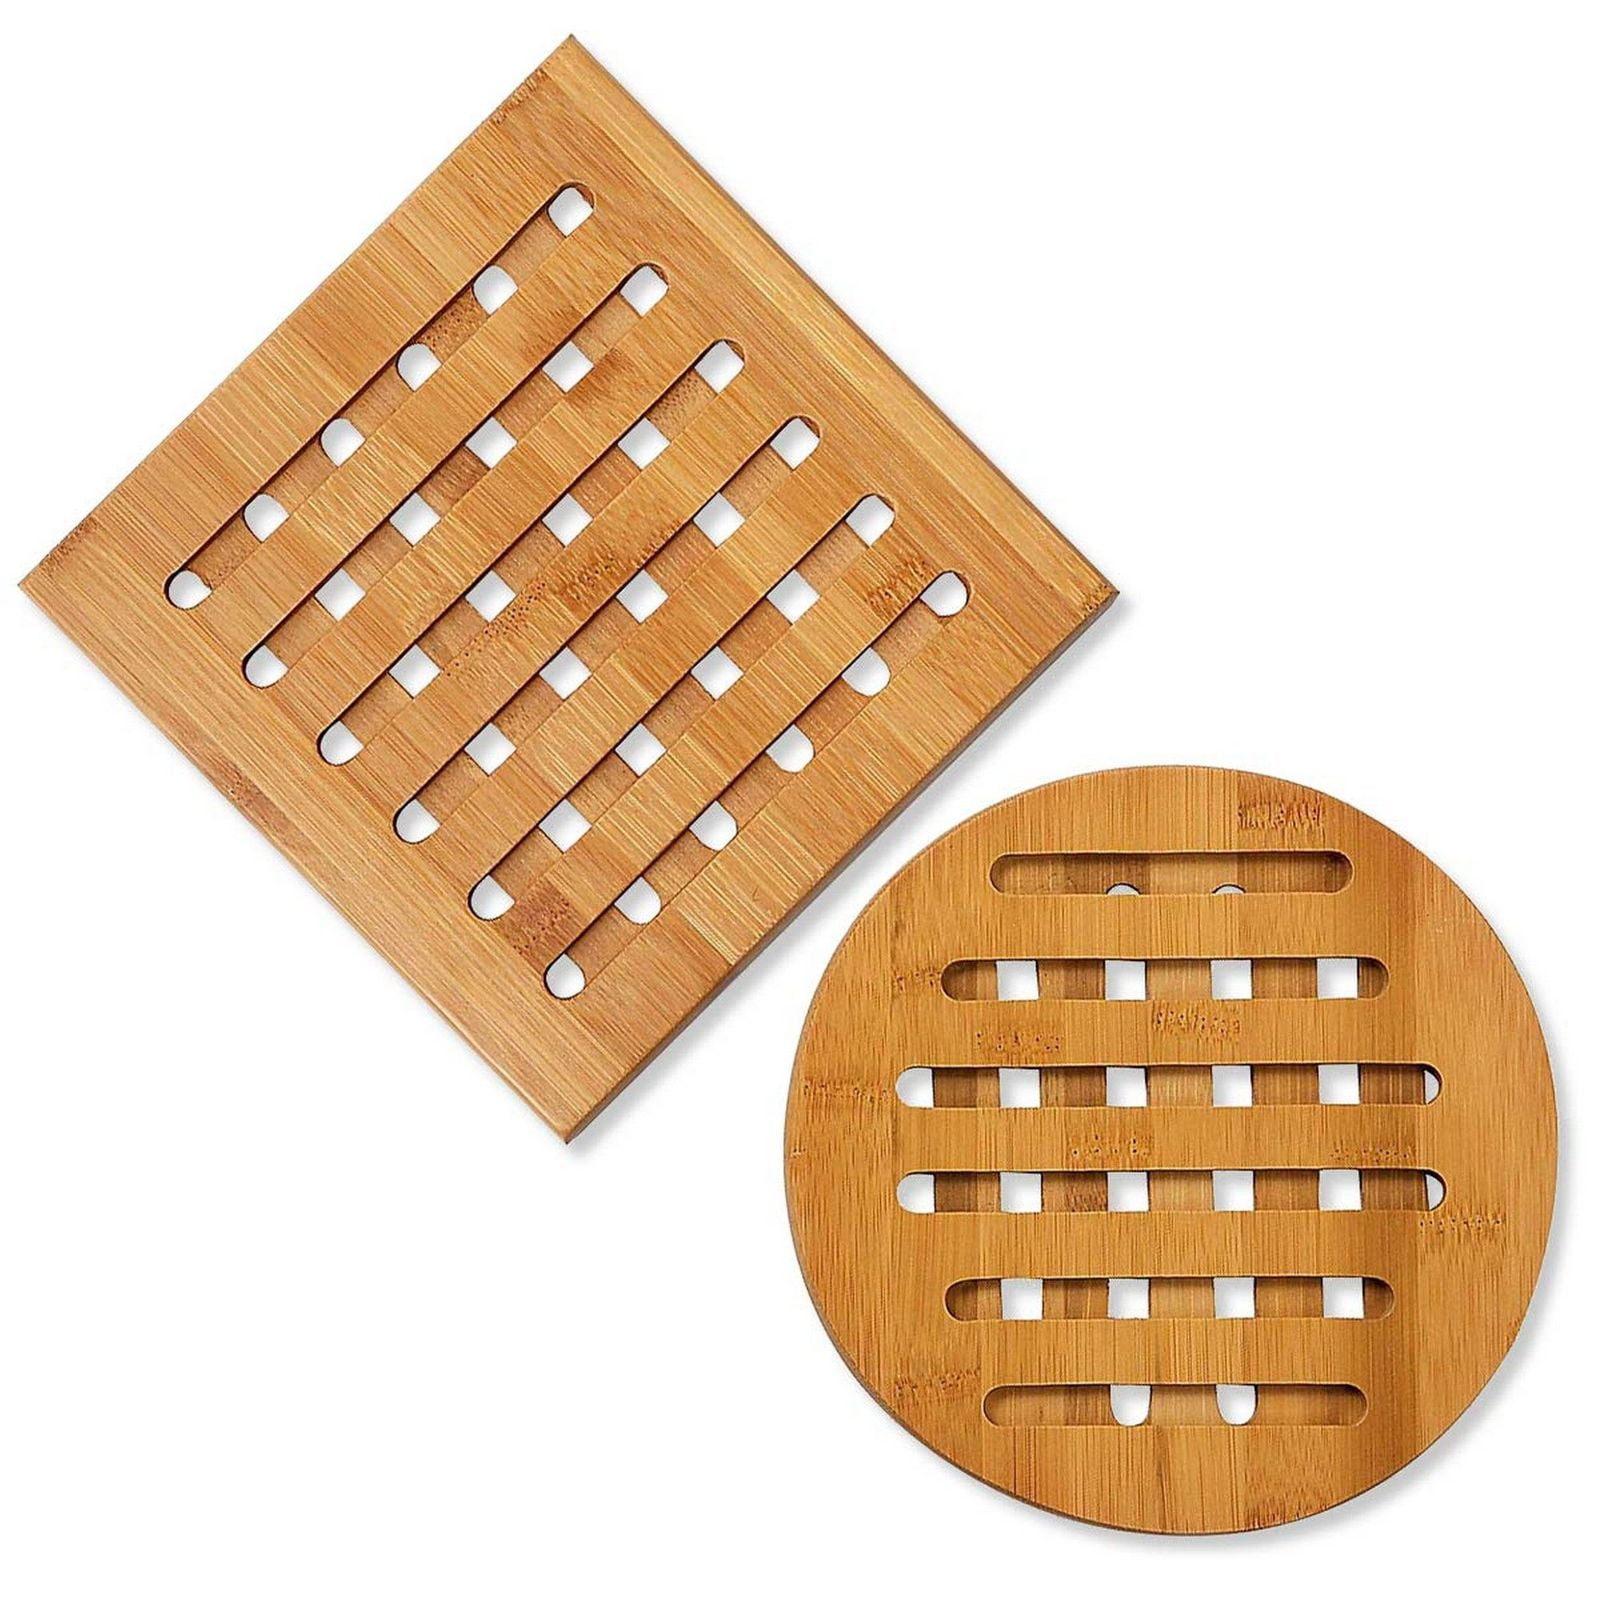 Round Bamboo Wood Trivet Kitchen Worktop Surface Protector Kettle Stand Hot Pan